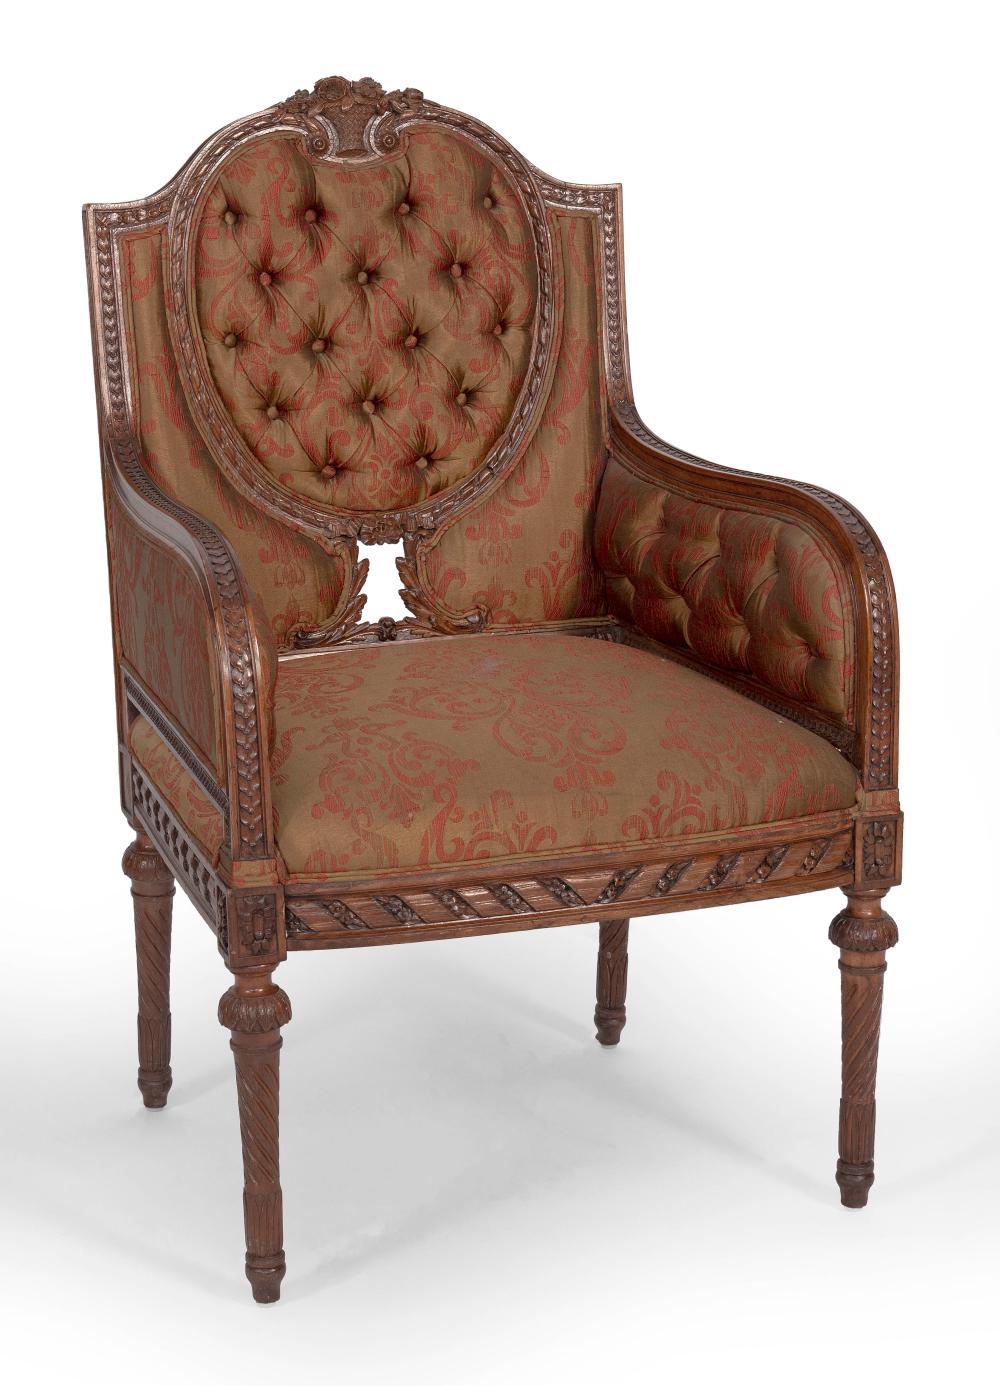 ARMCHAIR POSSIBLY HERTER BROTHERS 34e944